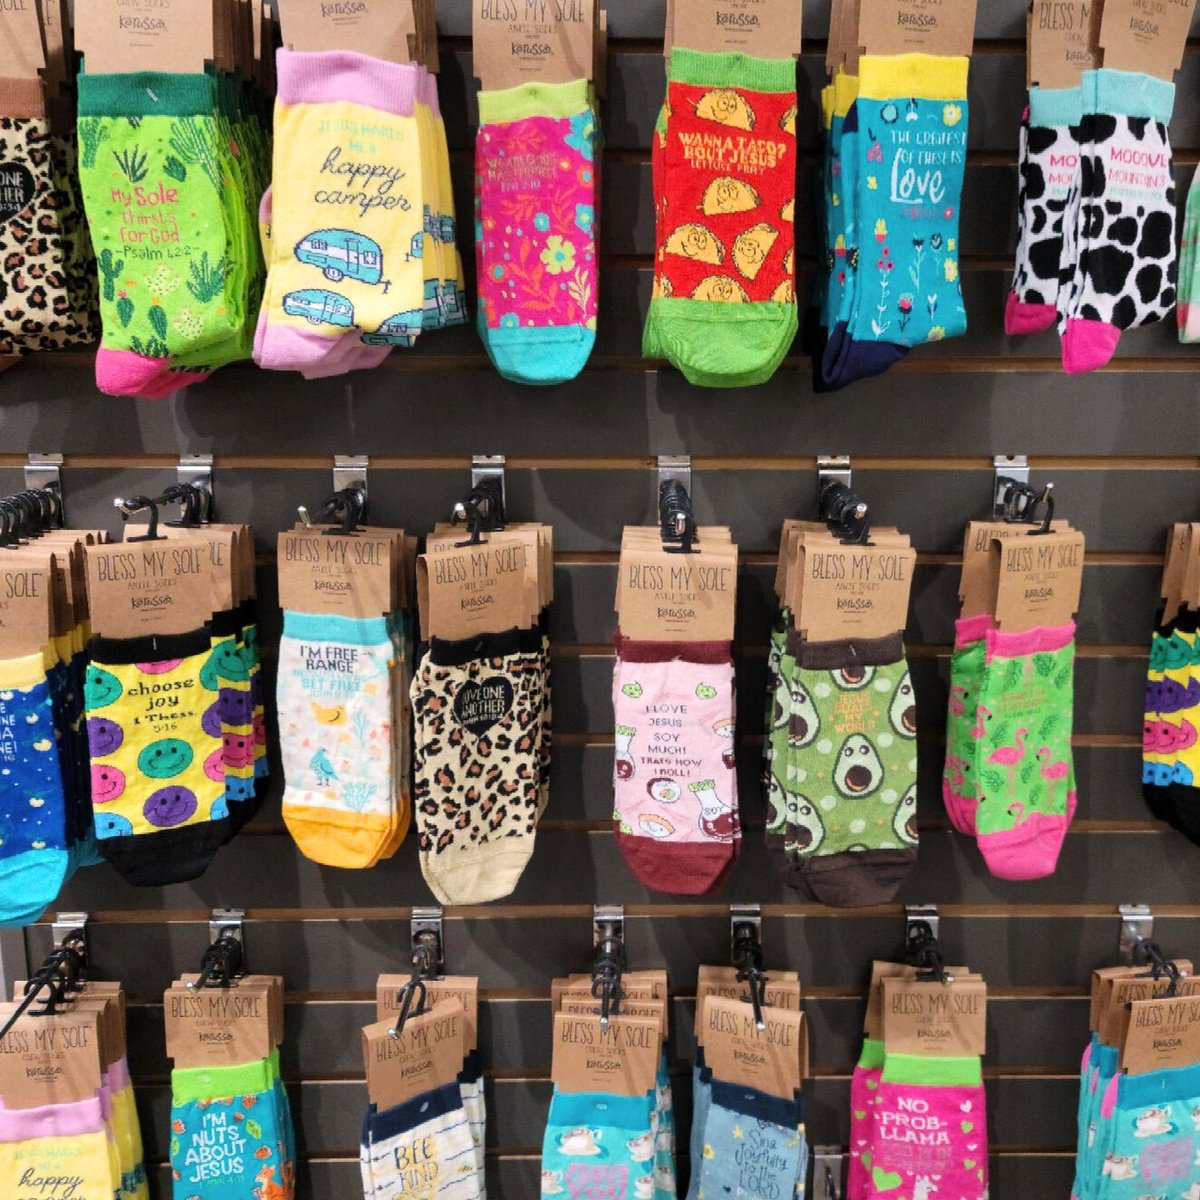 Need a gift? Or, just need something to brighten your day? We have a bunch of fun socks to choose from!